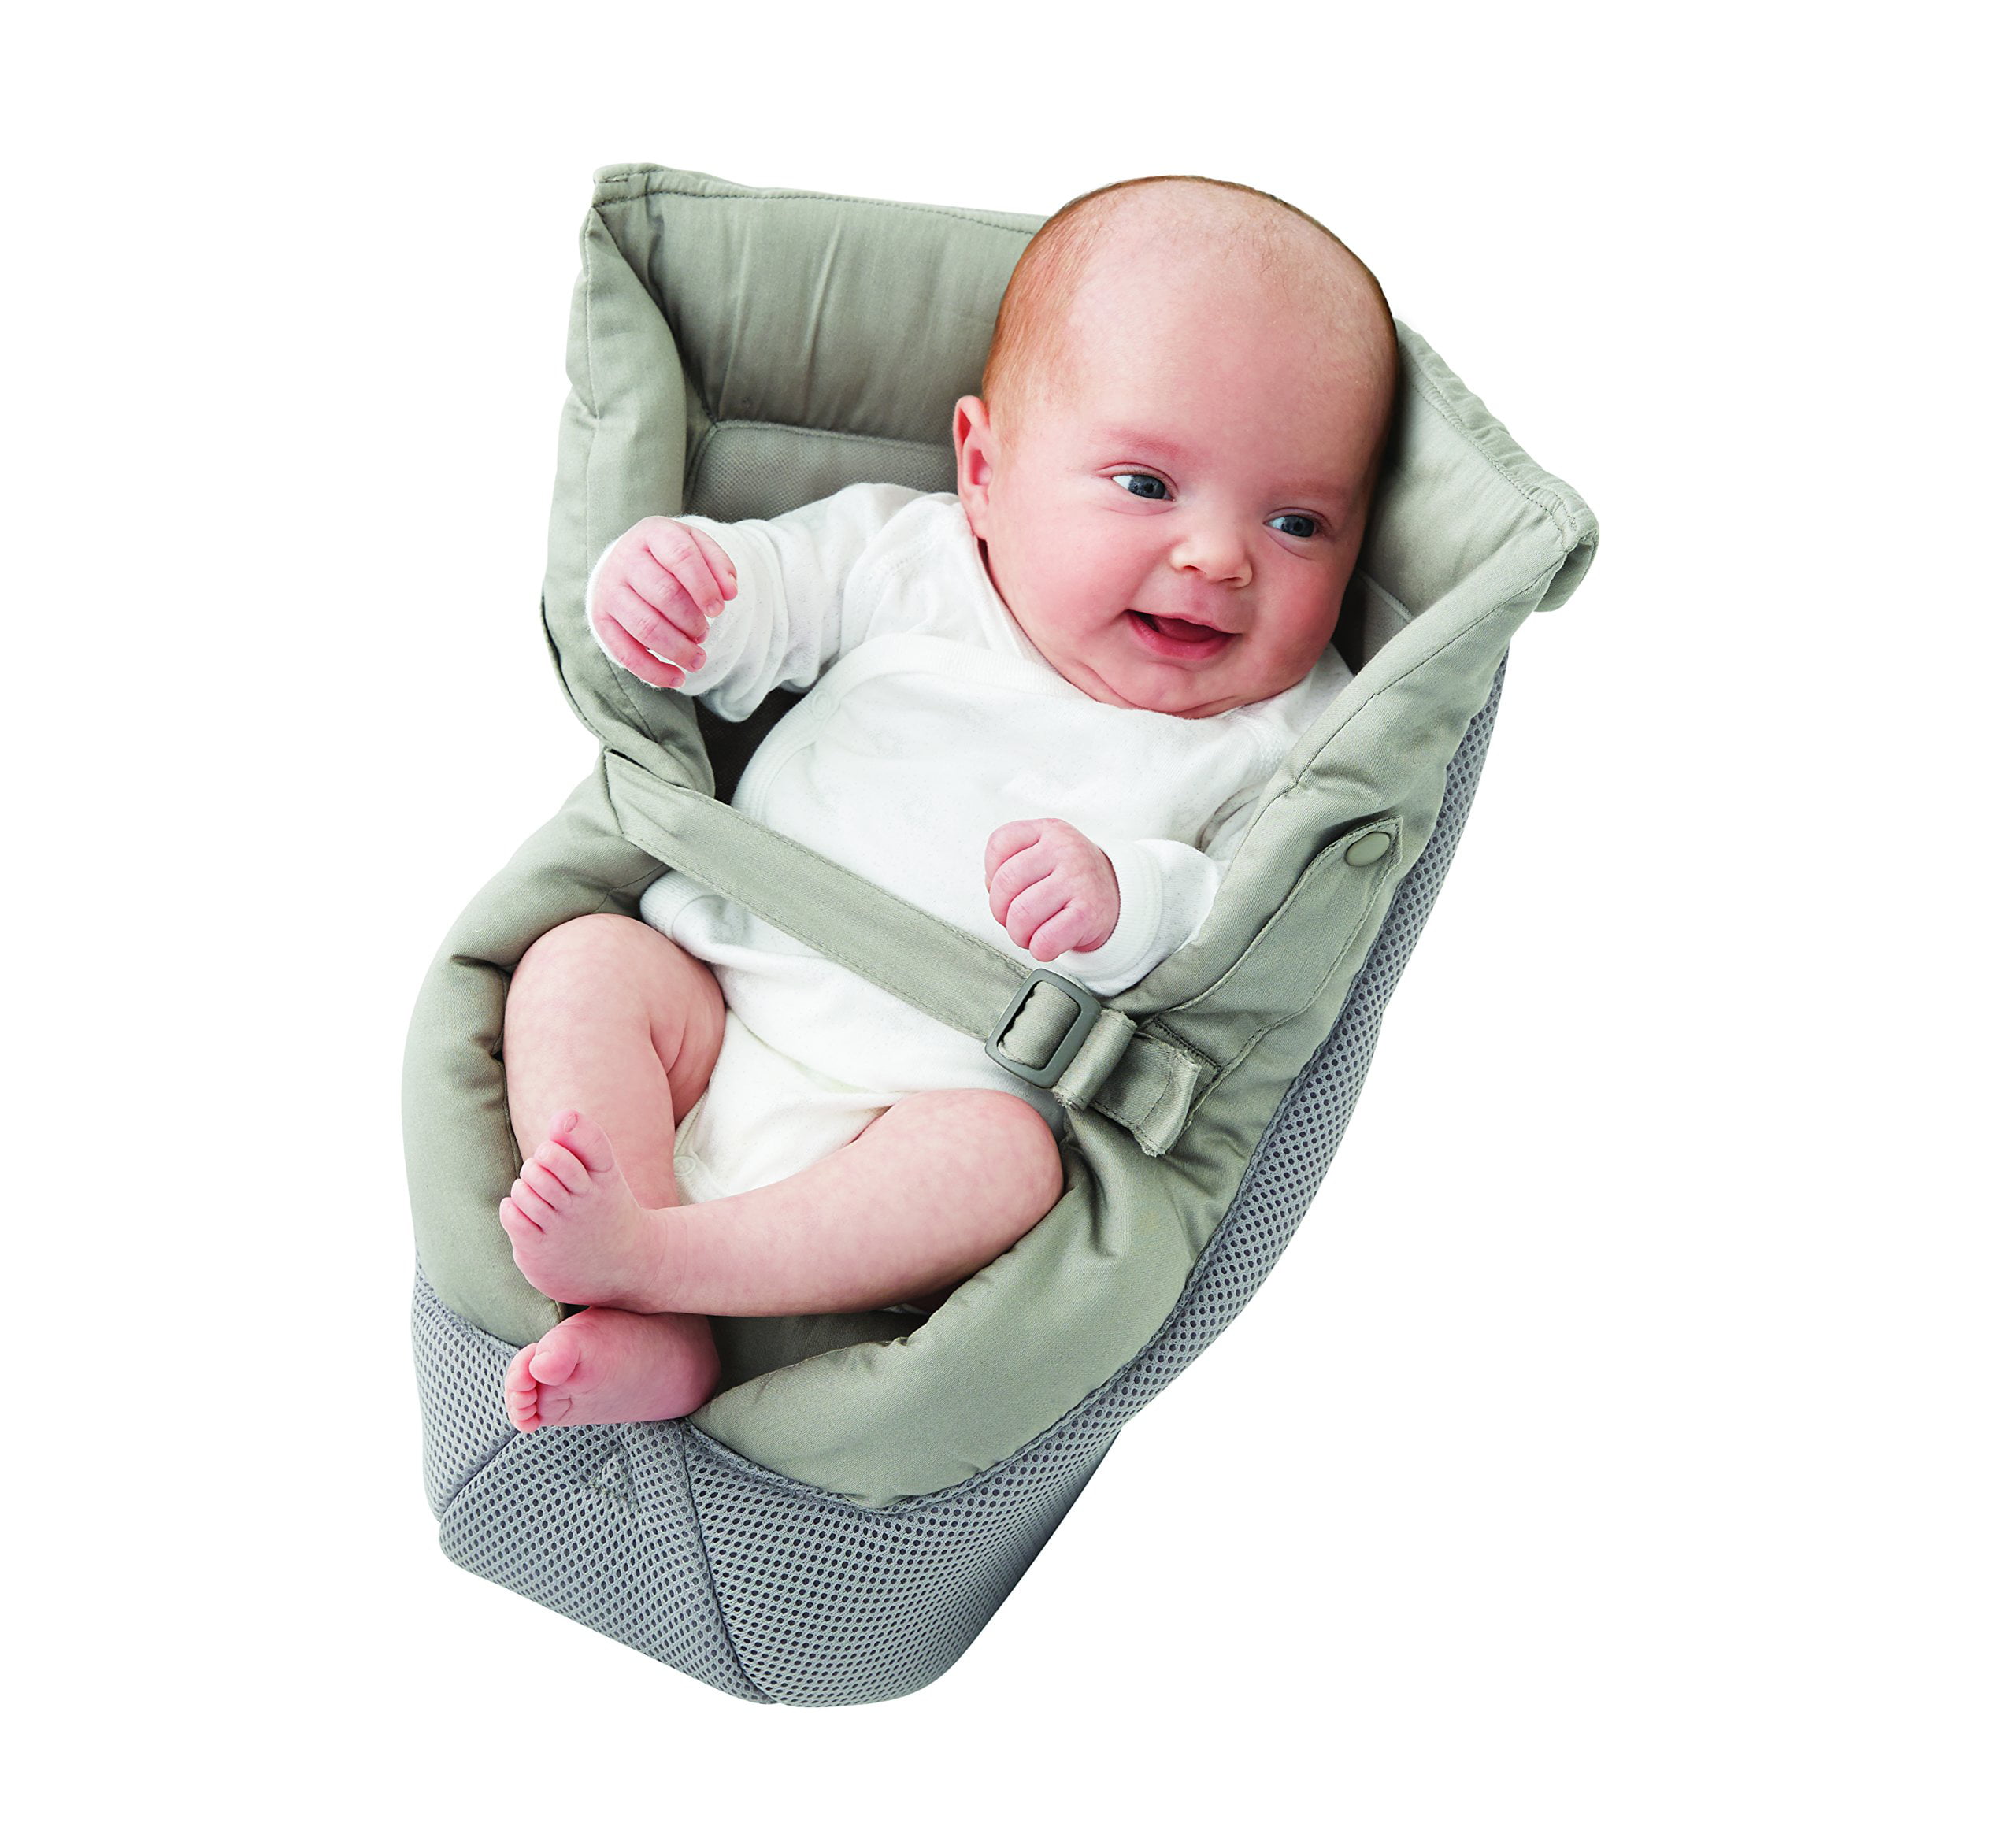 how to wear ergobaby with infant insert